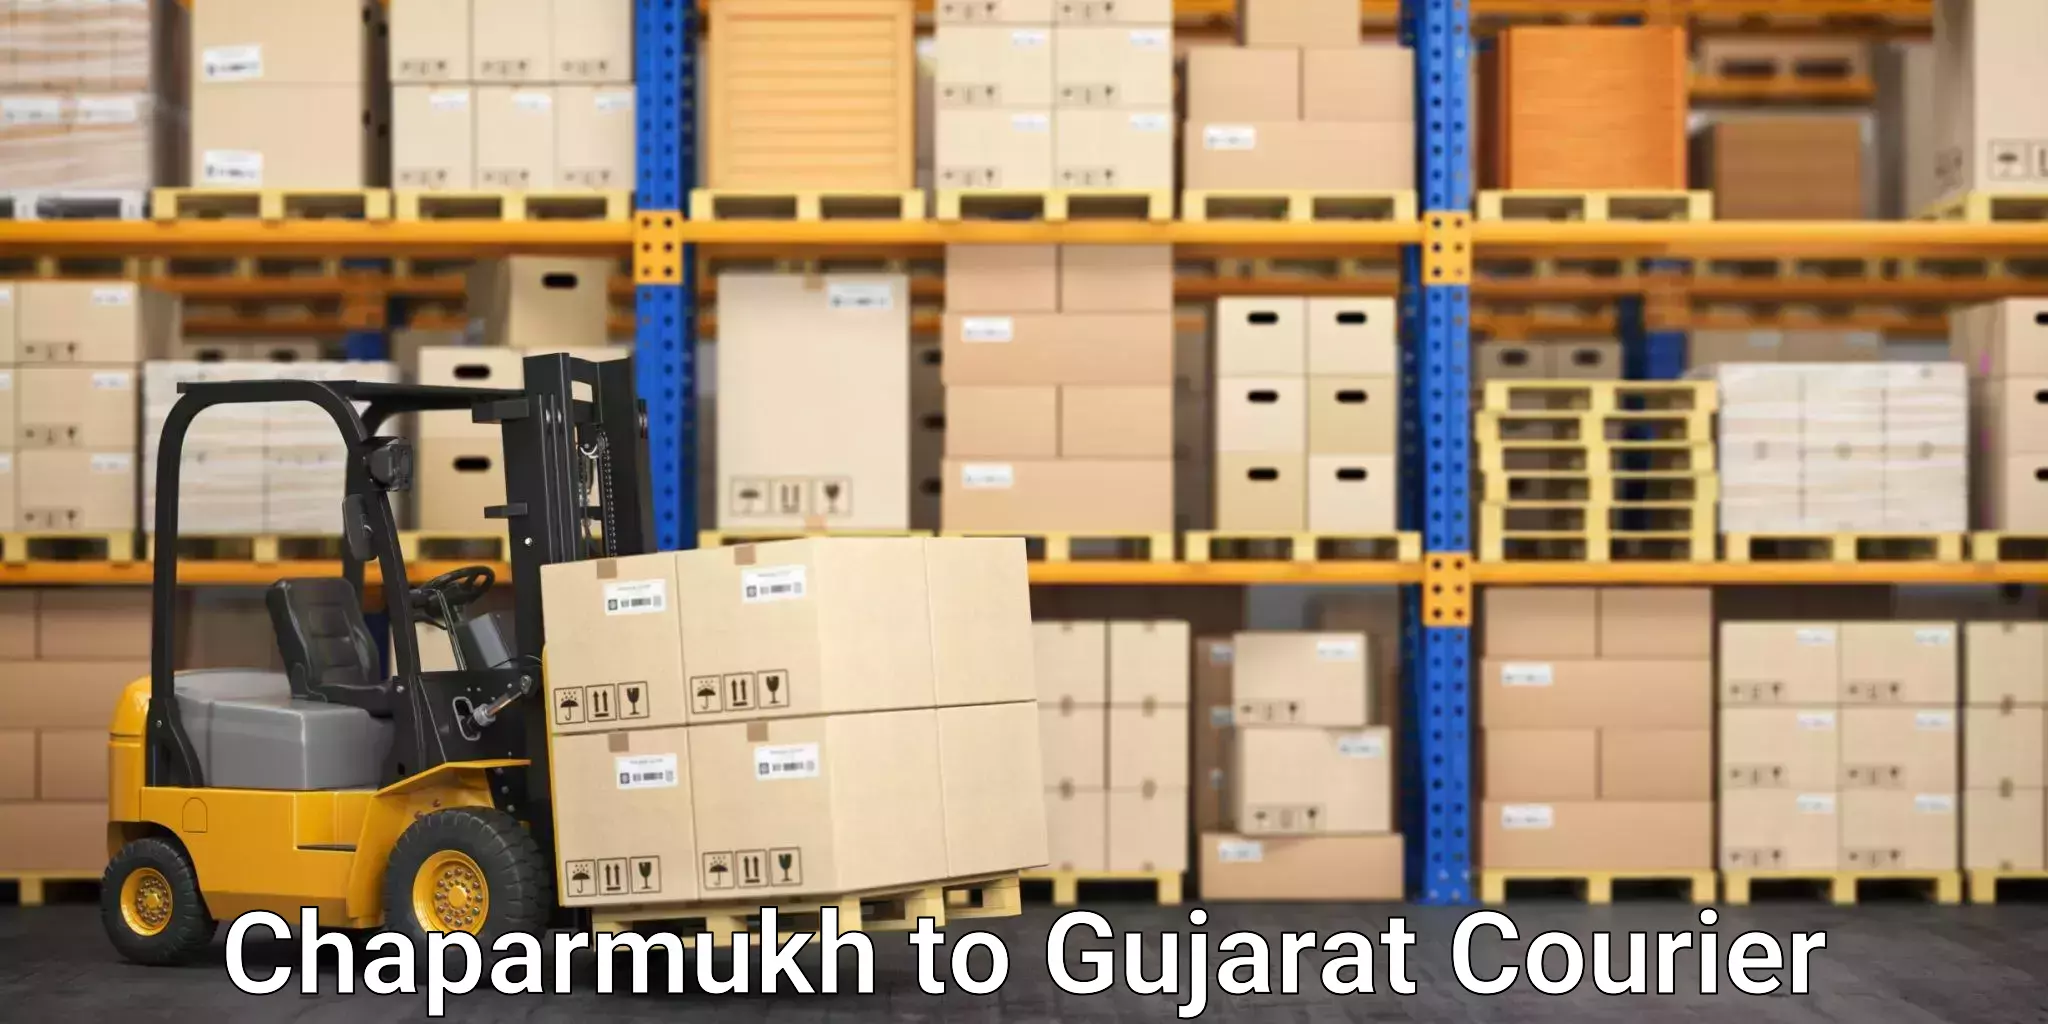 24-hour courier services Chaparmukh to Gujarat